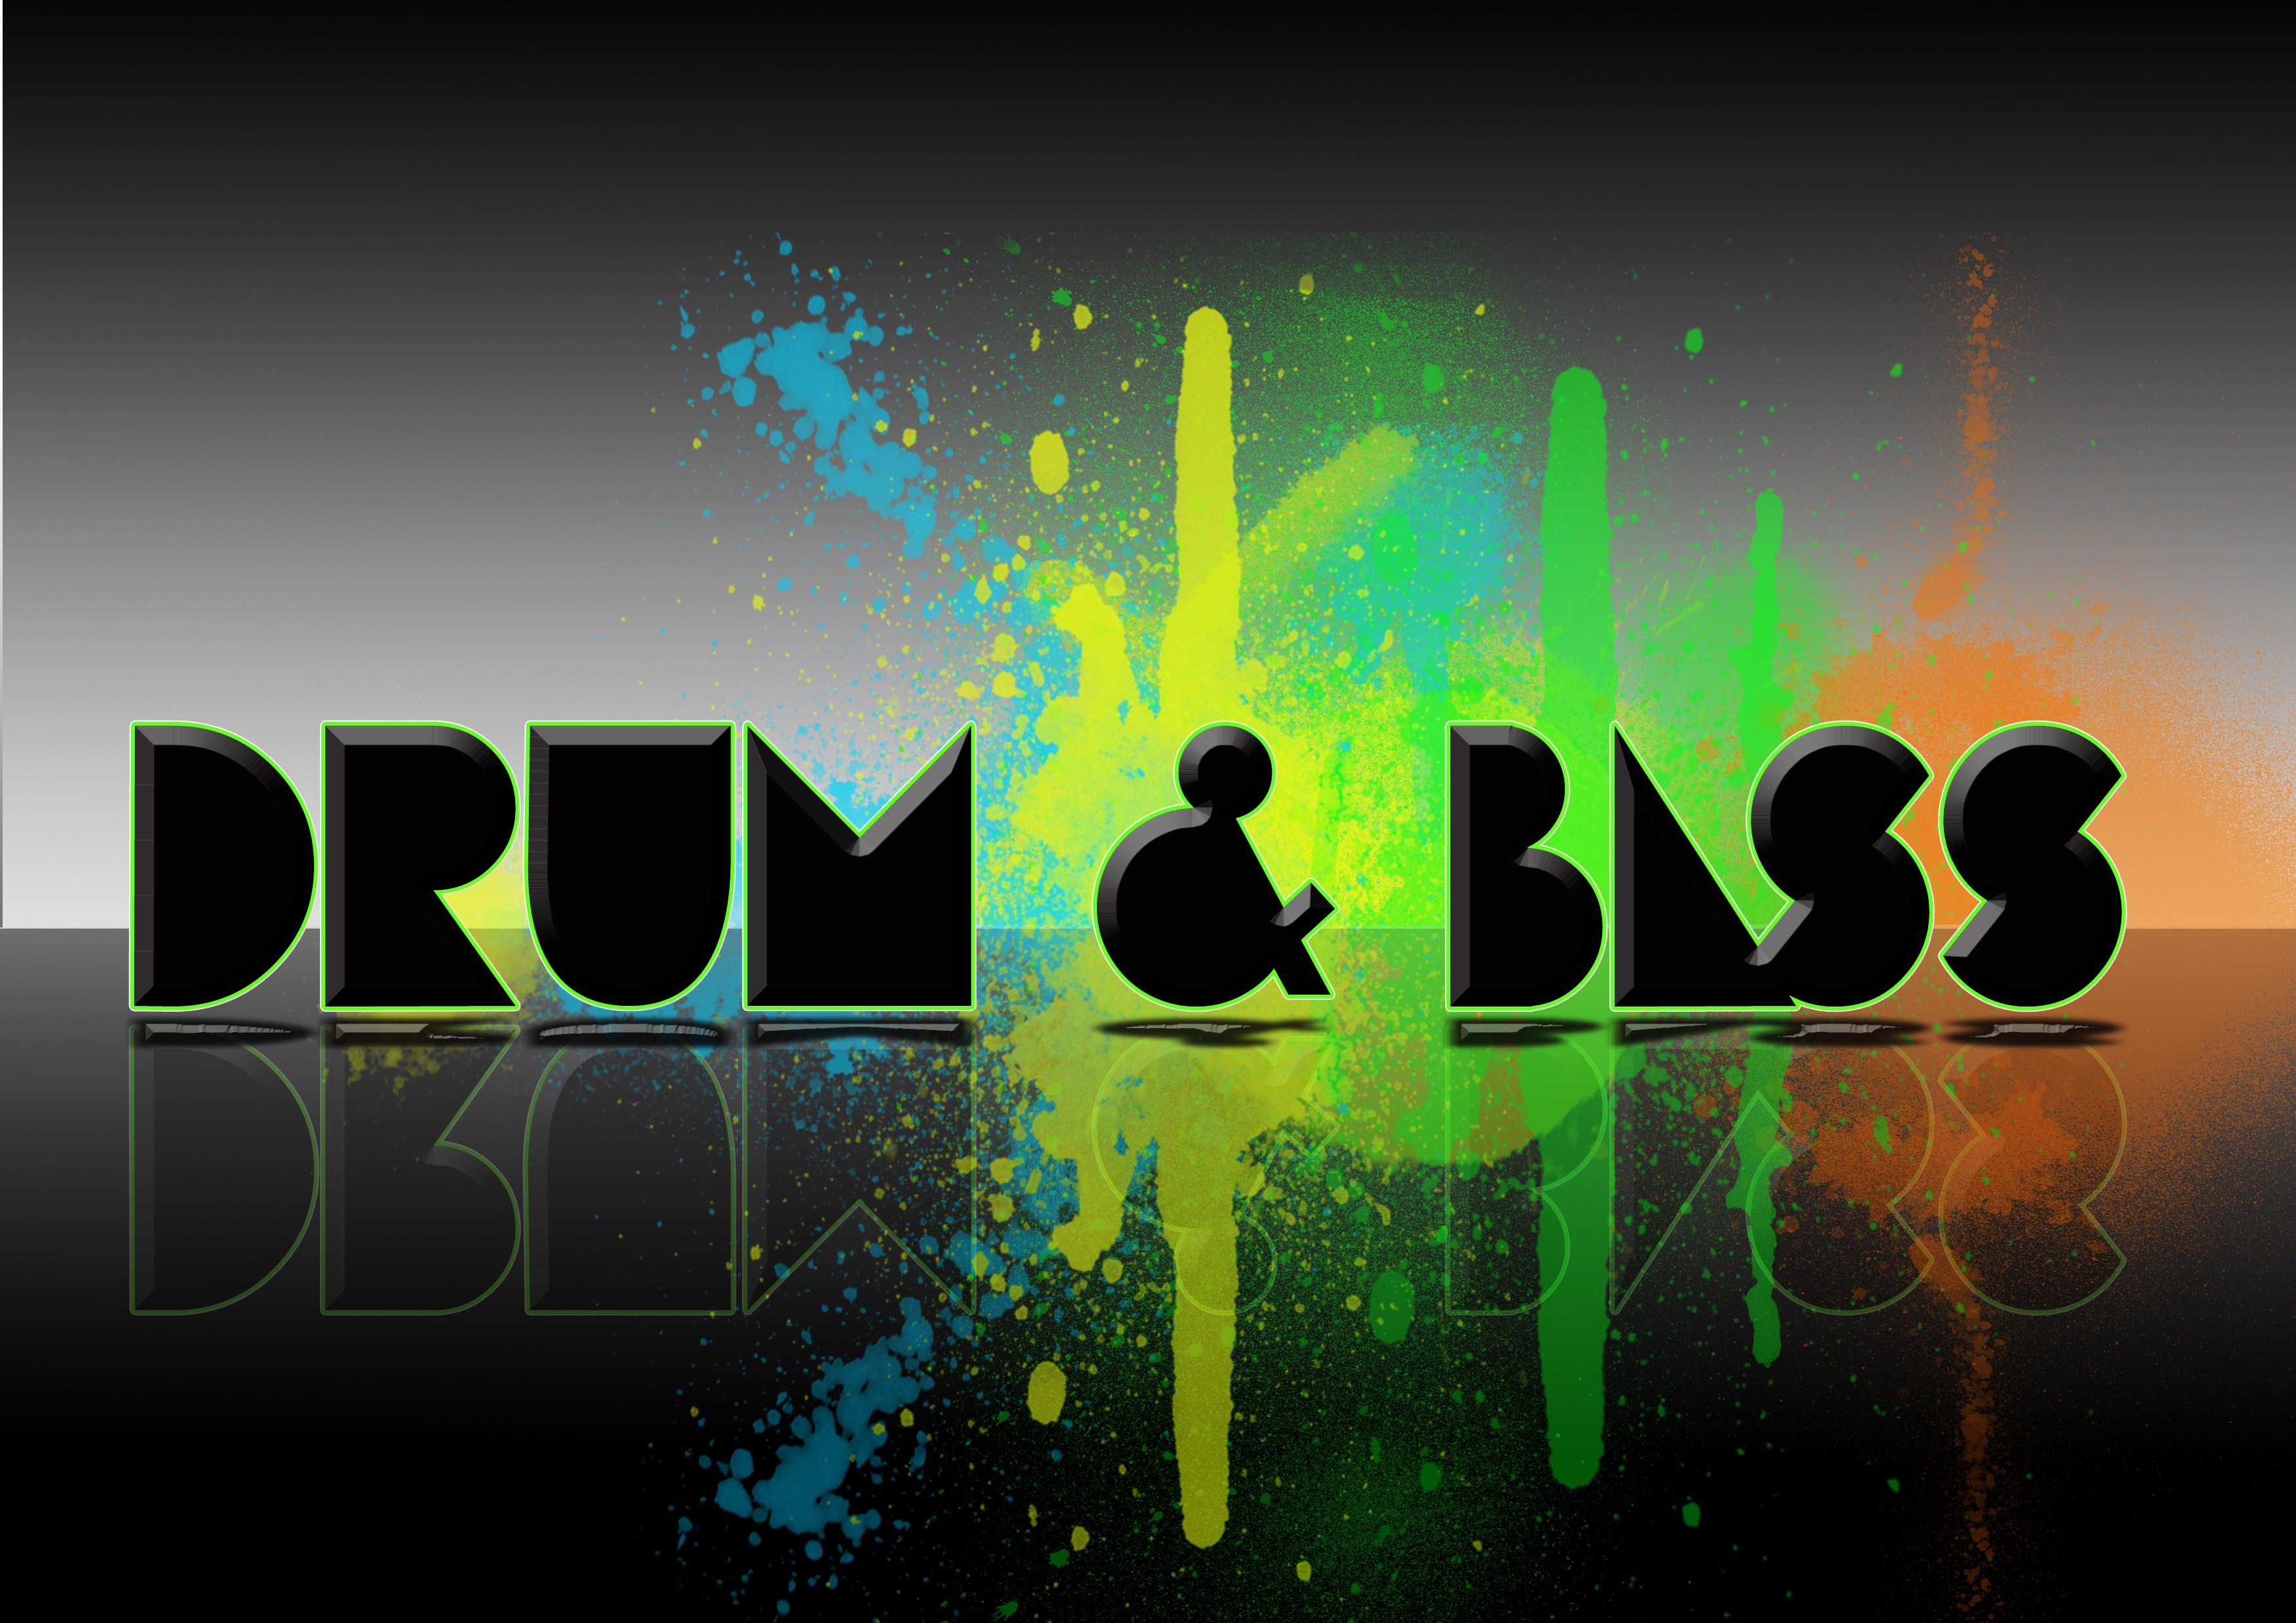 Free download drum n bass Drum Bass Dnb Electronic Drum and bass